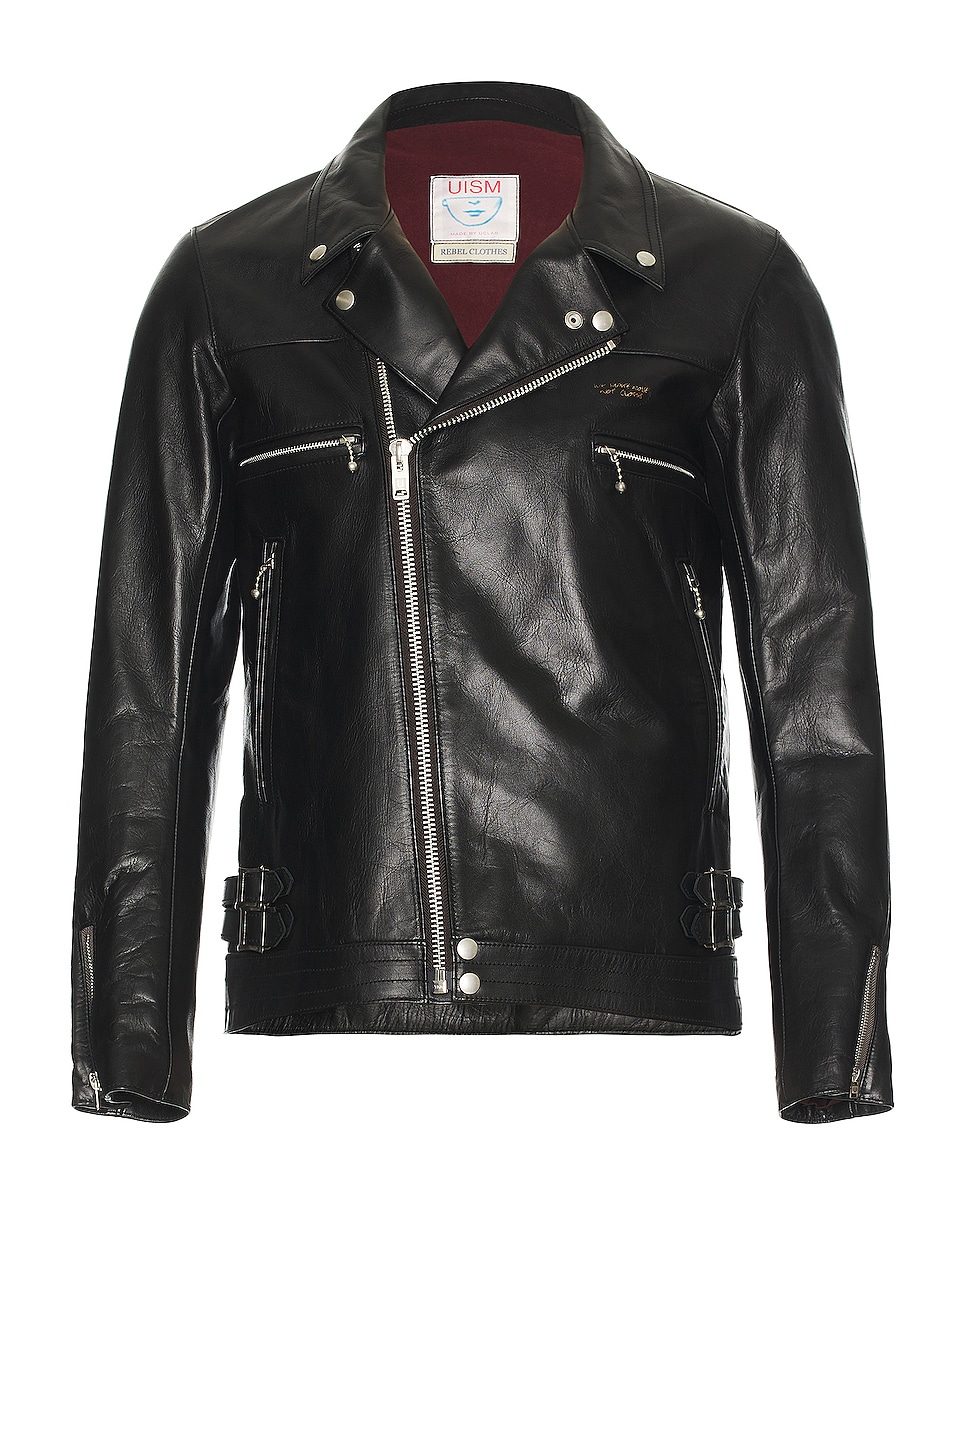 Image 1 of Undercover Leather Rider Jacket in Black